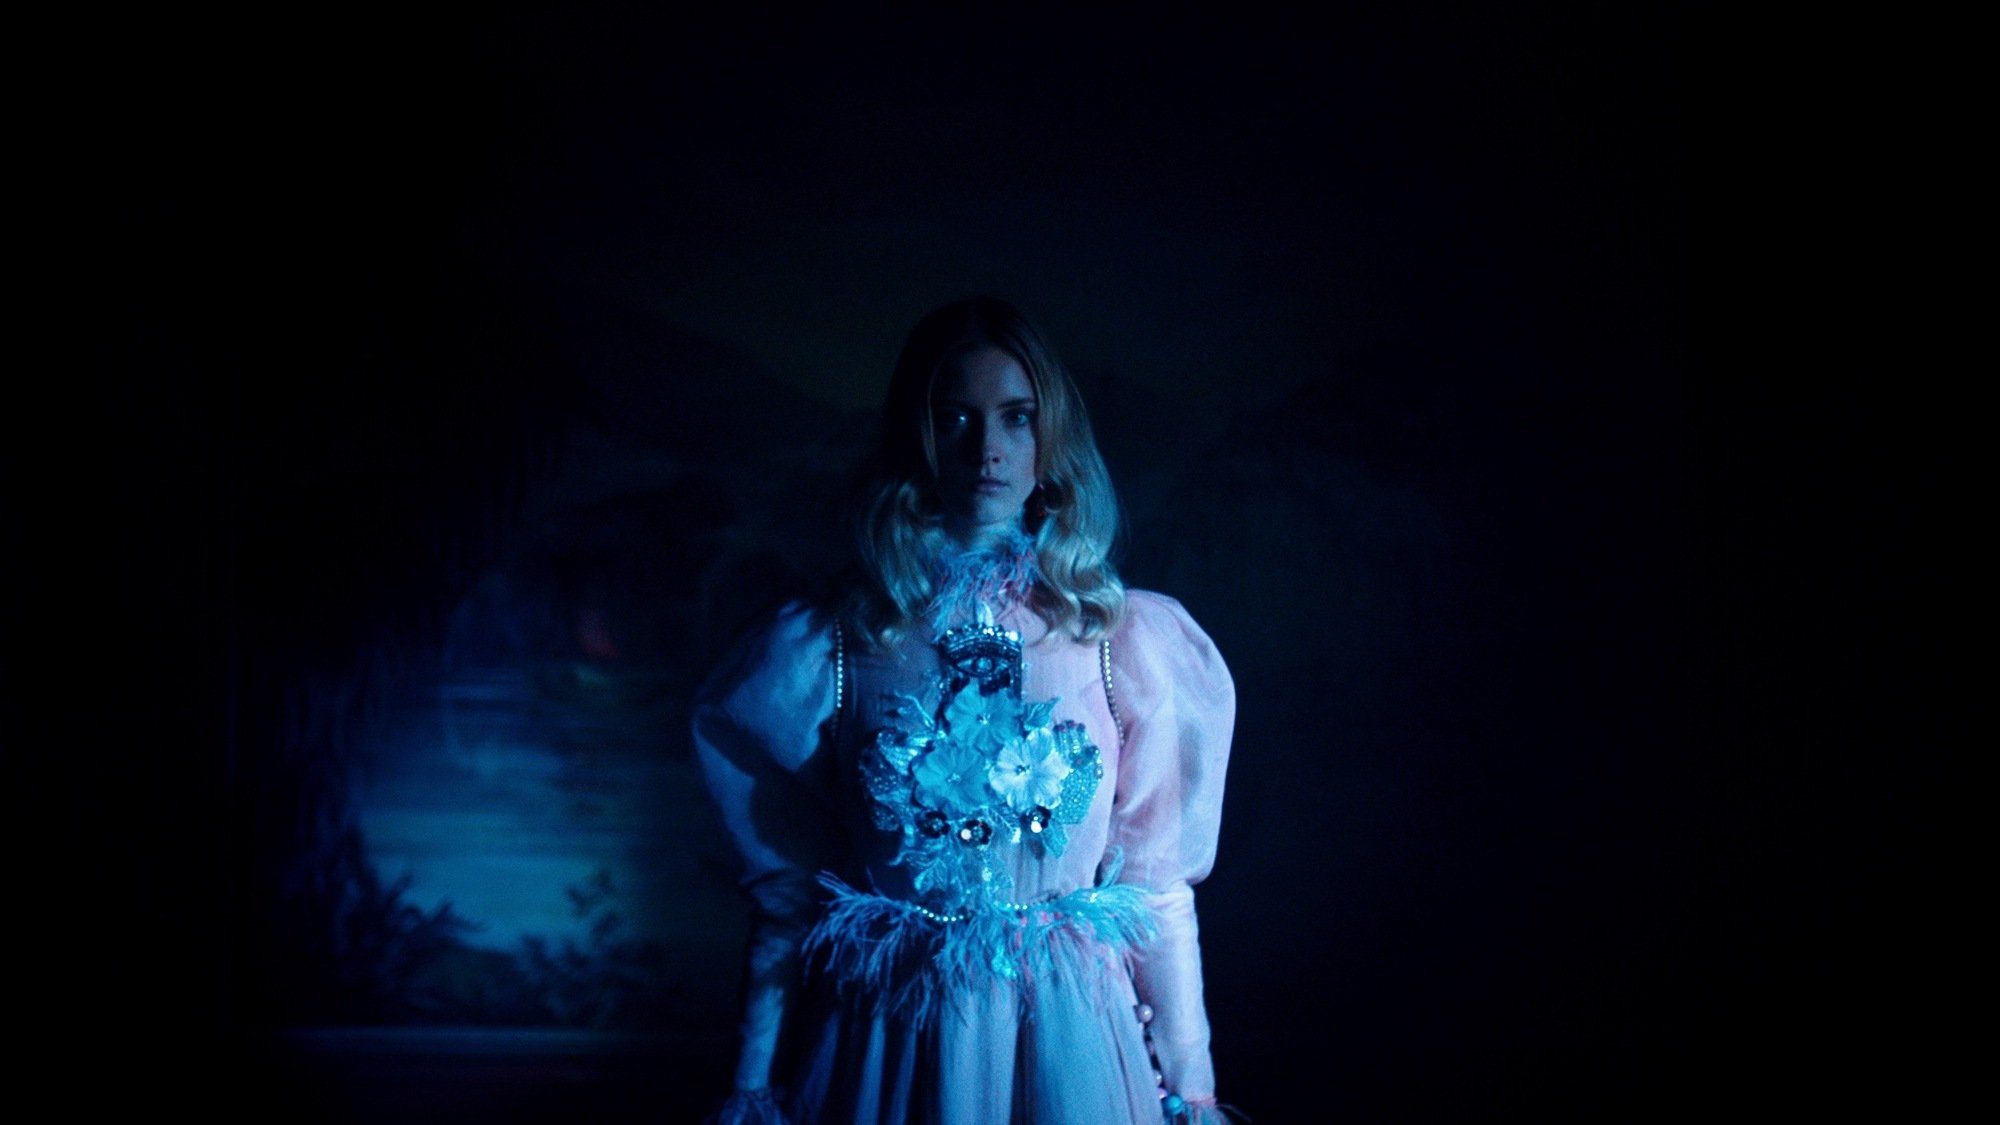 A blonde woman in a pink dress stands in a dark room. 